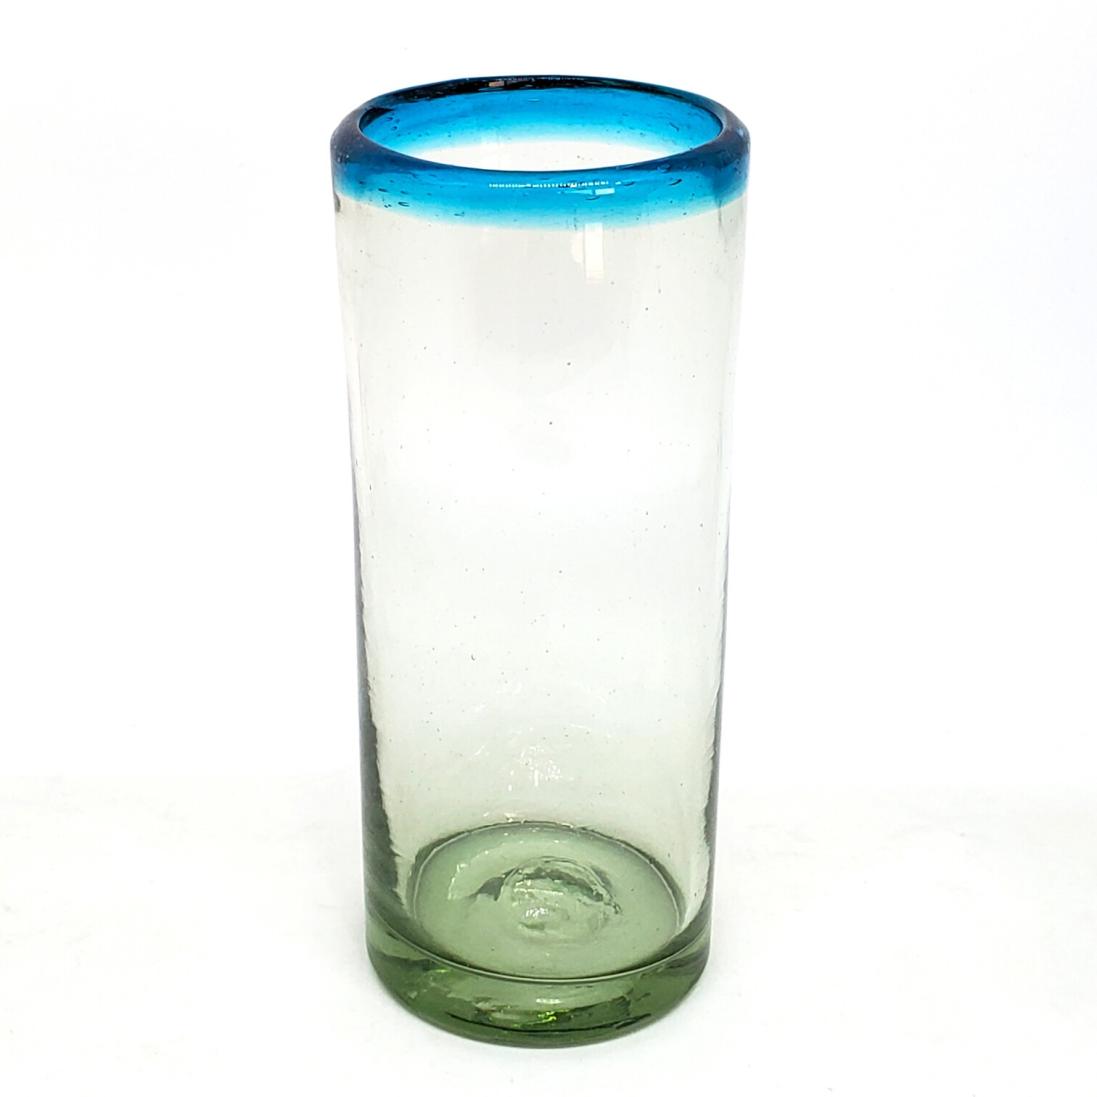 Wholesale MEXICAN GLASSWARE / Aqua Blue Rim 15 oz Highball Glasses  / Enjoy mojitos, cubas or any other refreshing drink with these classy highball glasses.